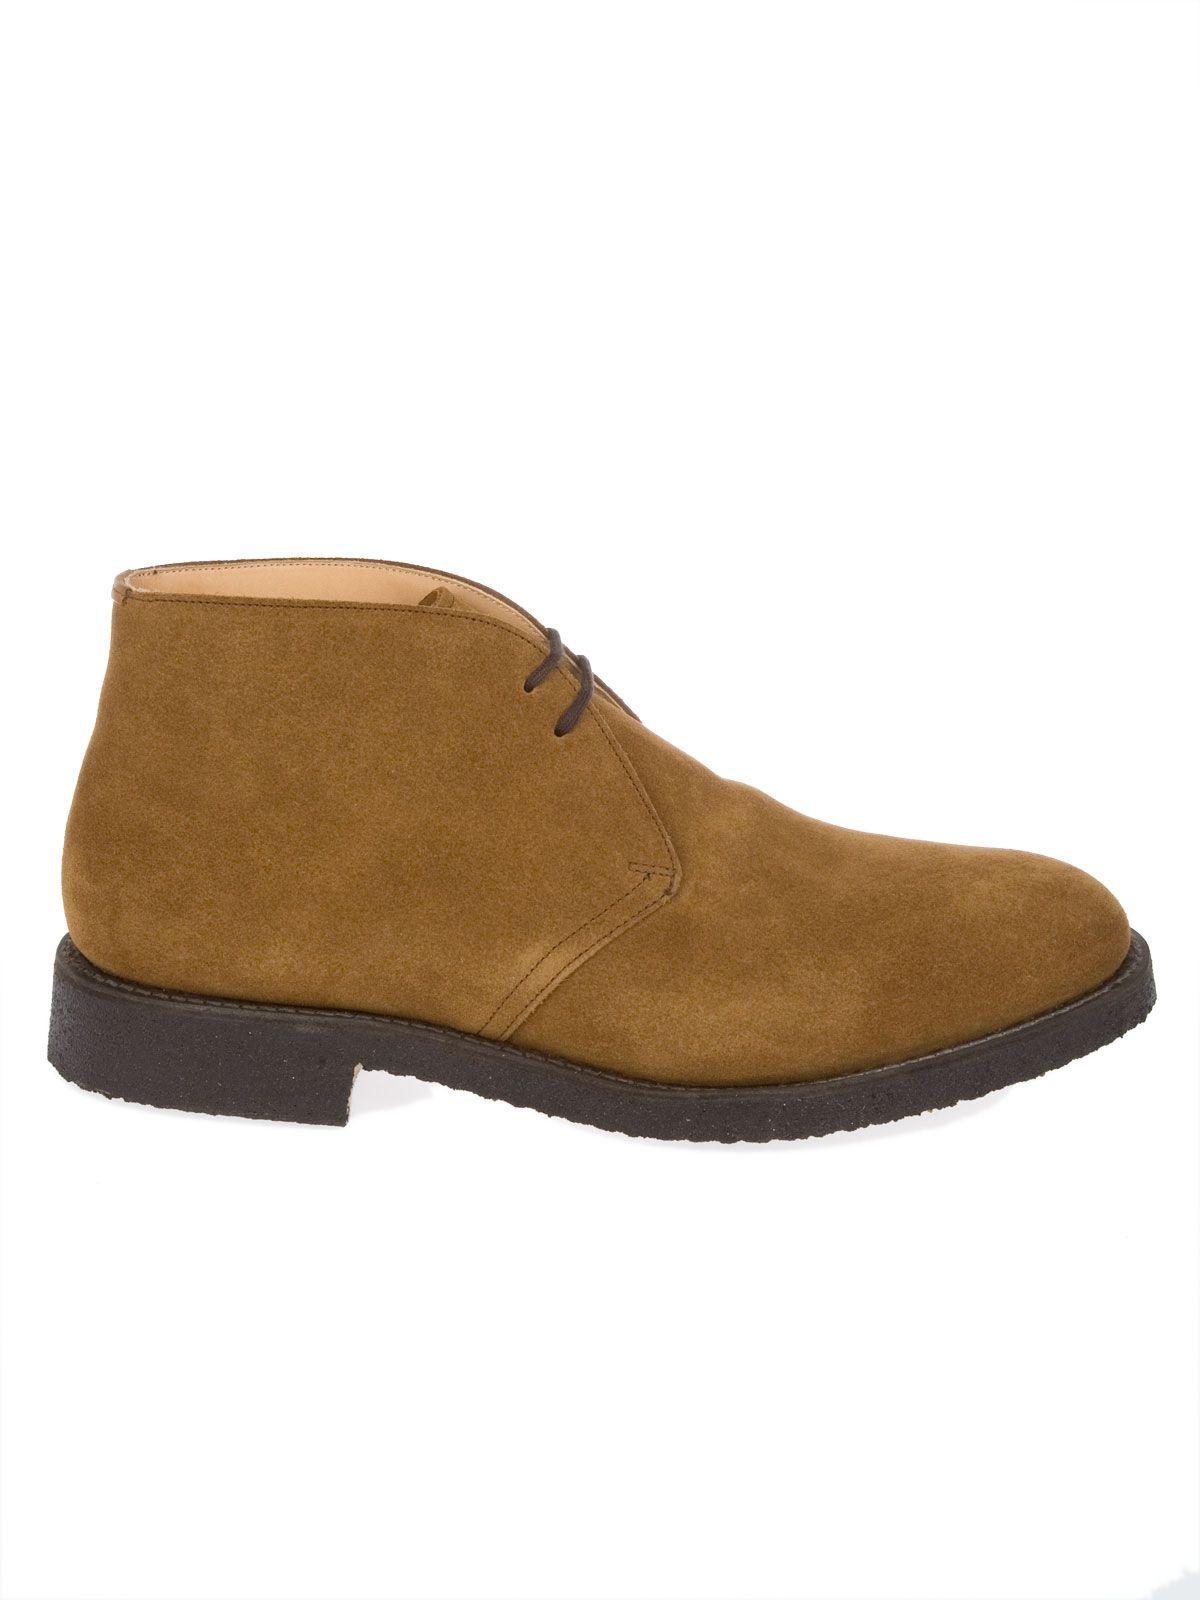 Church's Brown Suede Ankle Boots for Men - Lyst